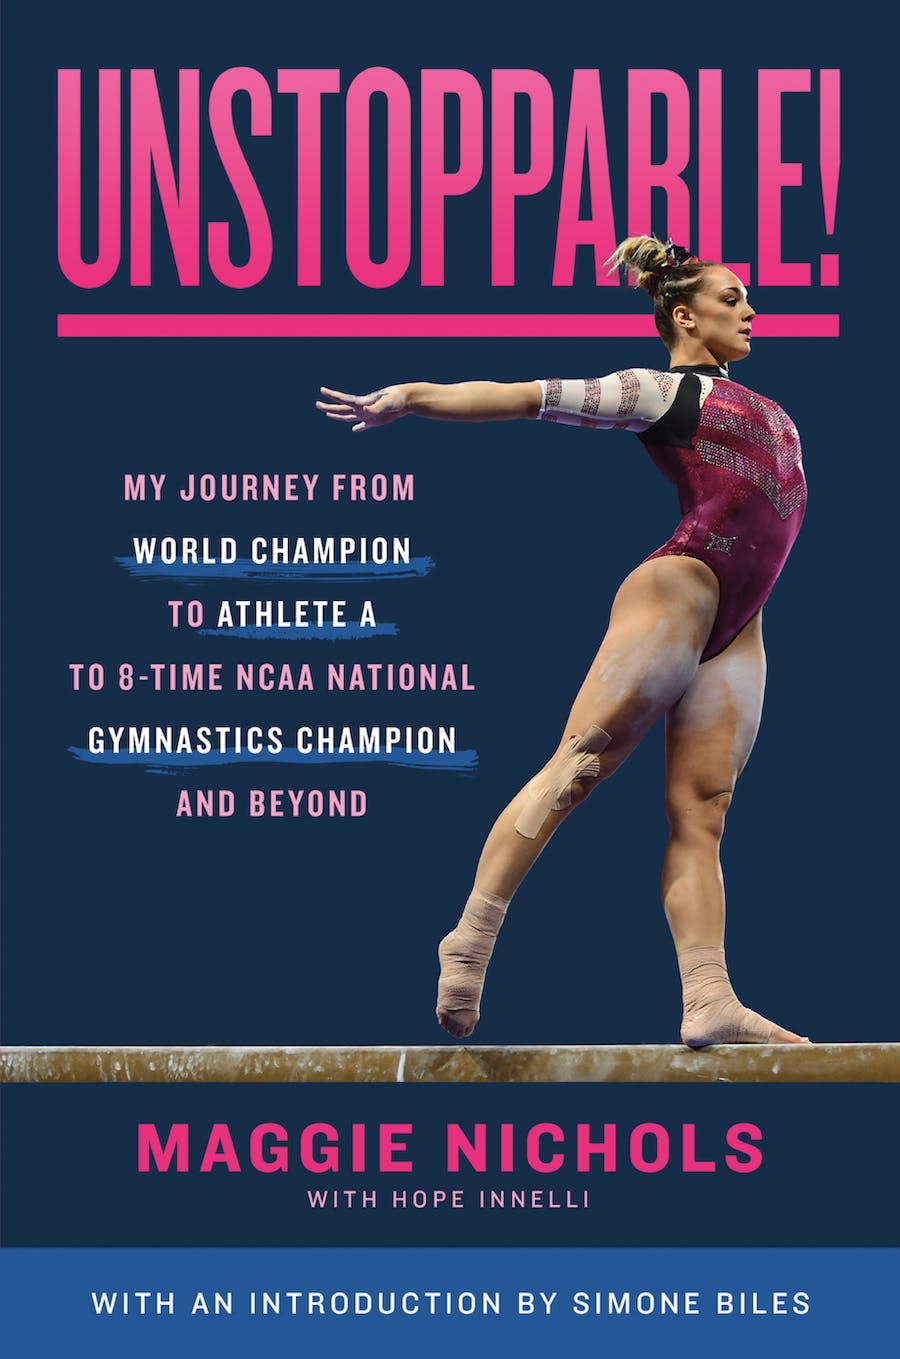 Unstoppable! by Maggie Nichols with Hope Innelli